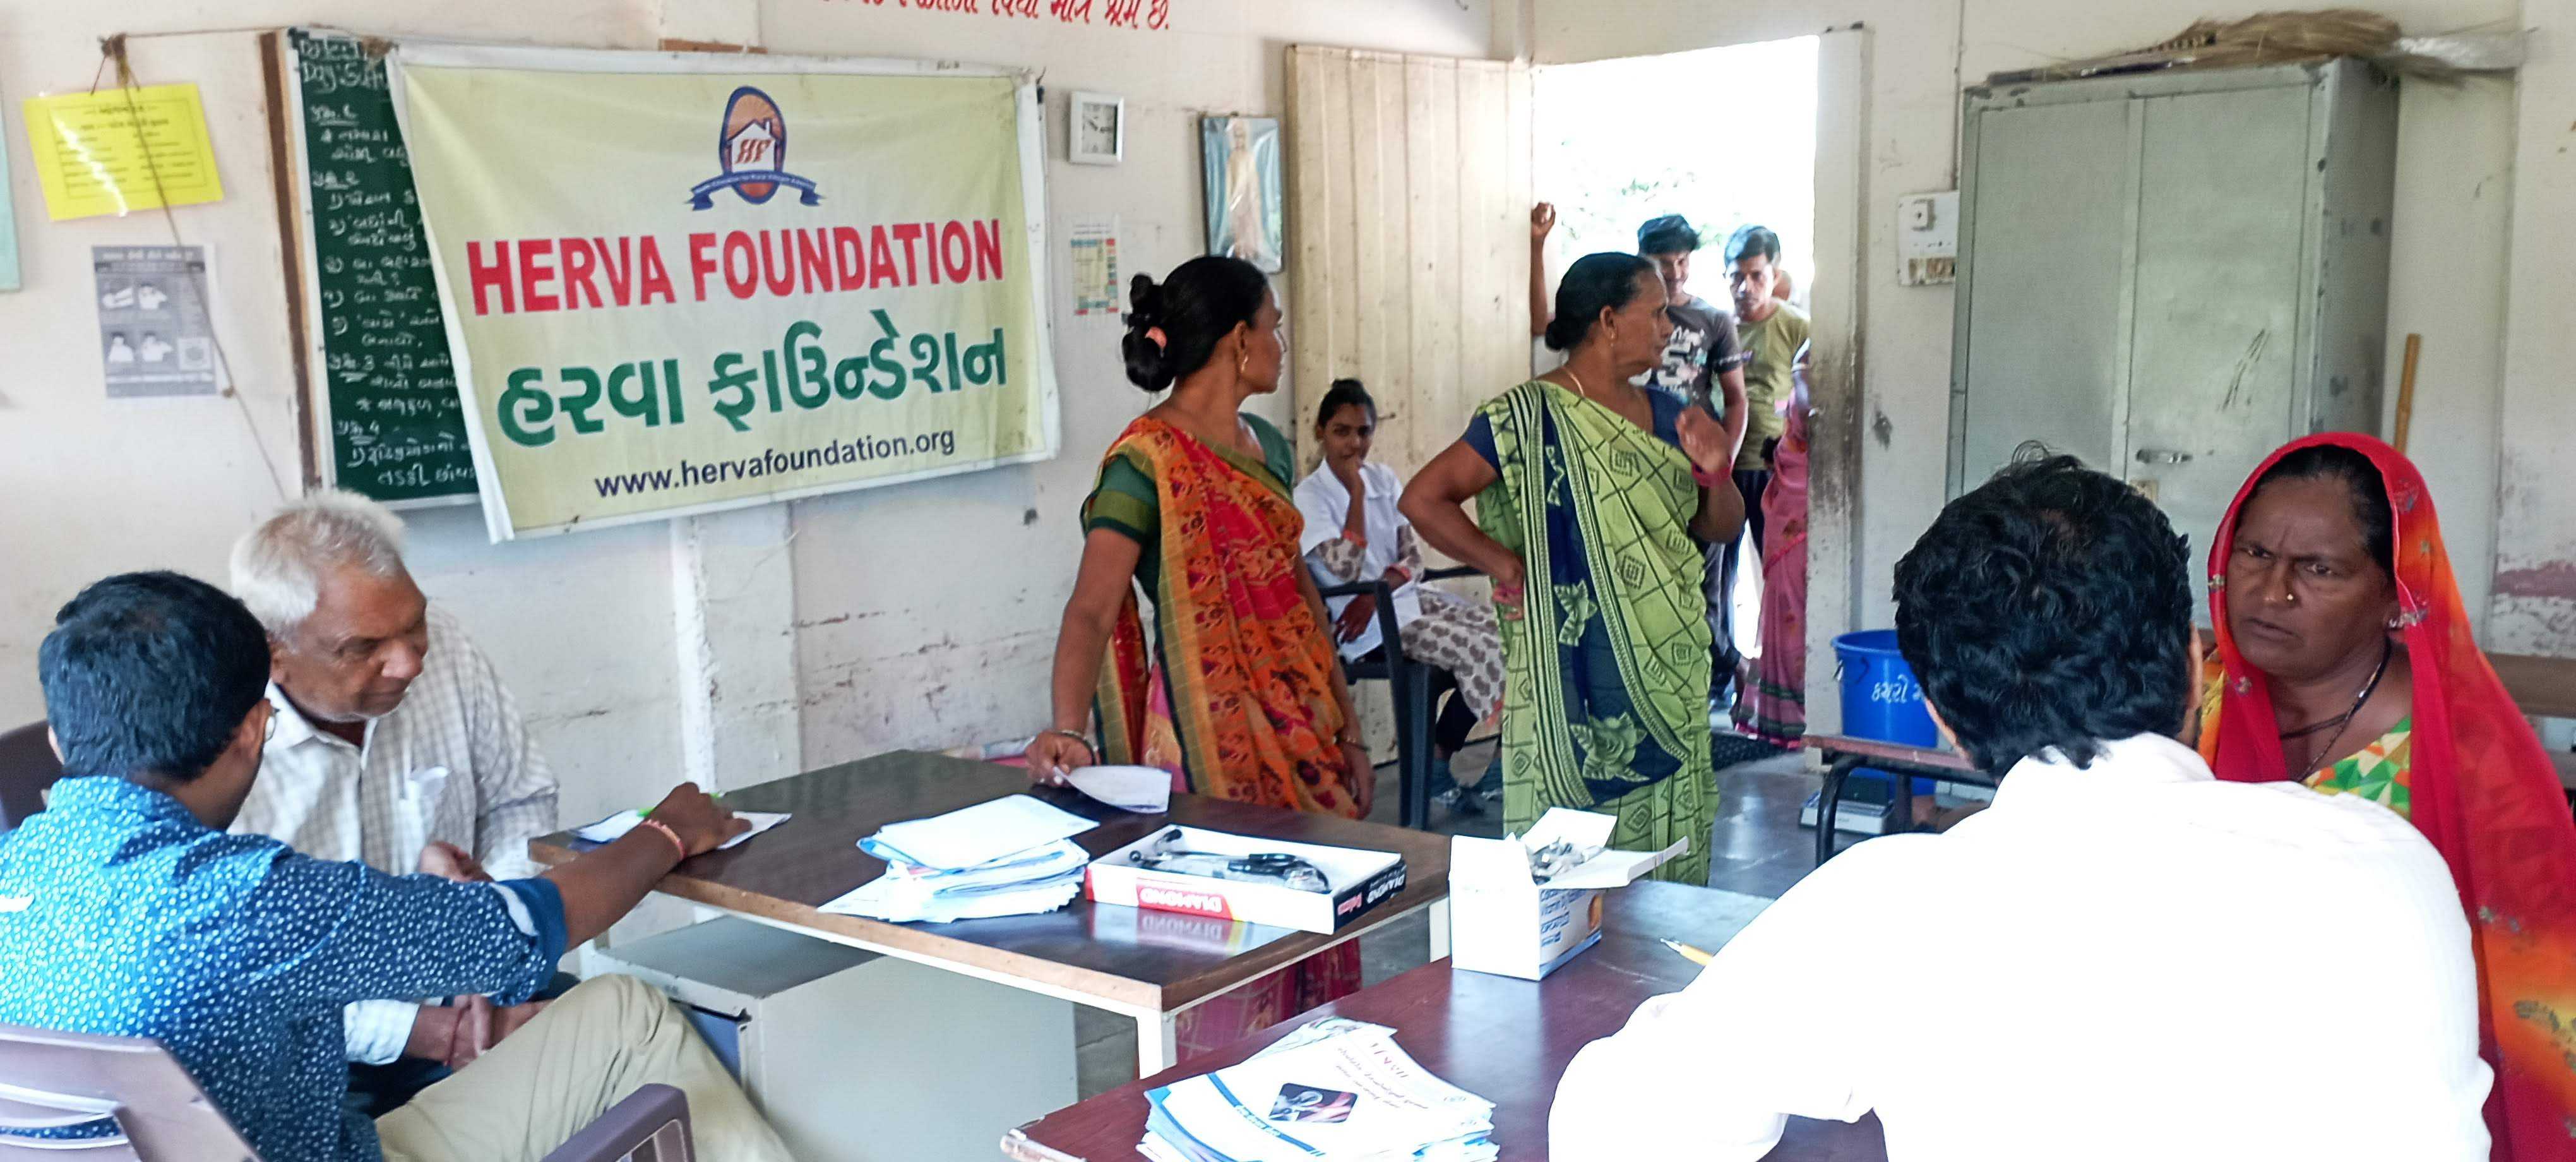 On 1st Oct 2022, Herva Foundation jointly with the Rotary Club of Ahmedabad North had an Eye camp and Orthopaedic camp at village Kevadiya, a small village in Kapadvanj Jilla in Kheda district.
Free EYE CAMP: 245 registered In eye care (male 116 and female 129 ) of which 56 senior citizens (Male 39 and 17 female) . Four students were found with eye problems. Distributed 190 Spectacles. 11 persons were found to have Cataracts and have been referred to Kapadvanj Hospital for a free operation. Special thanks to Dr Charturbhai Patel and Dr Dashratbhai Patel for their managing the eye camp. 
Free ORTHOPAEDIC CAMP: Trisha Multispeciality Hospital, Ahmedabad had come with their team. 92 villagers registered. Free medicines were given and a few were suggested for operations at Ahmedabad. 50 people were X rayed through a portable X-ray machine and advised for appropriate further treatment.
The villagers could get the benefit of getting an X-ray at their doorsteps. They had to go to the nearest city to avail of such a facility.
